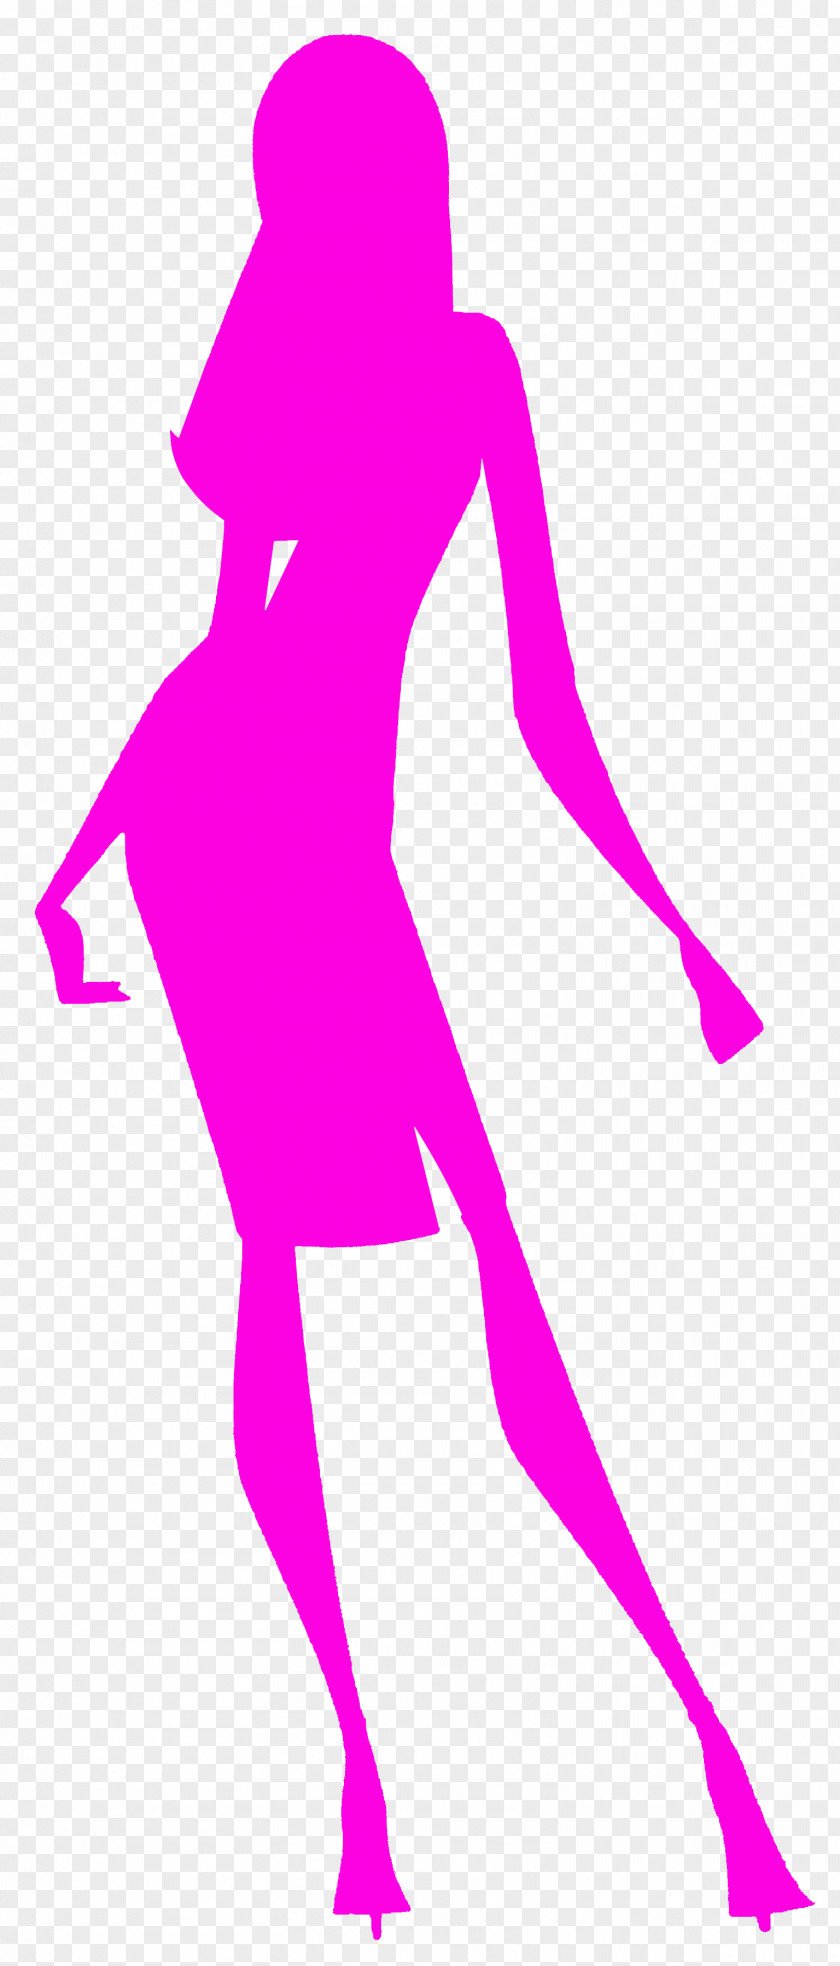 Women In The Workplace Silhouette Woman Illustration PNG